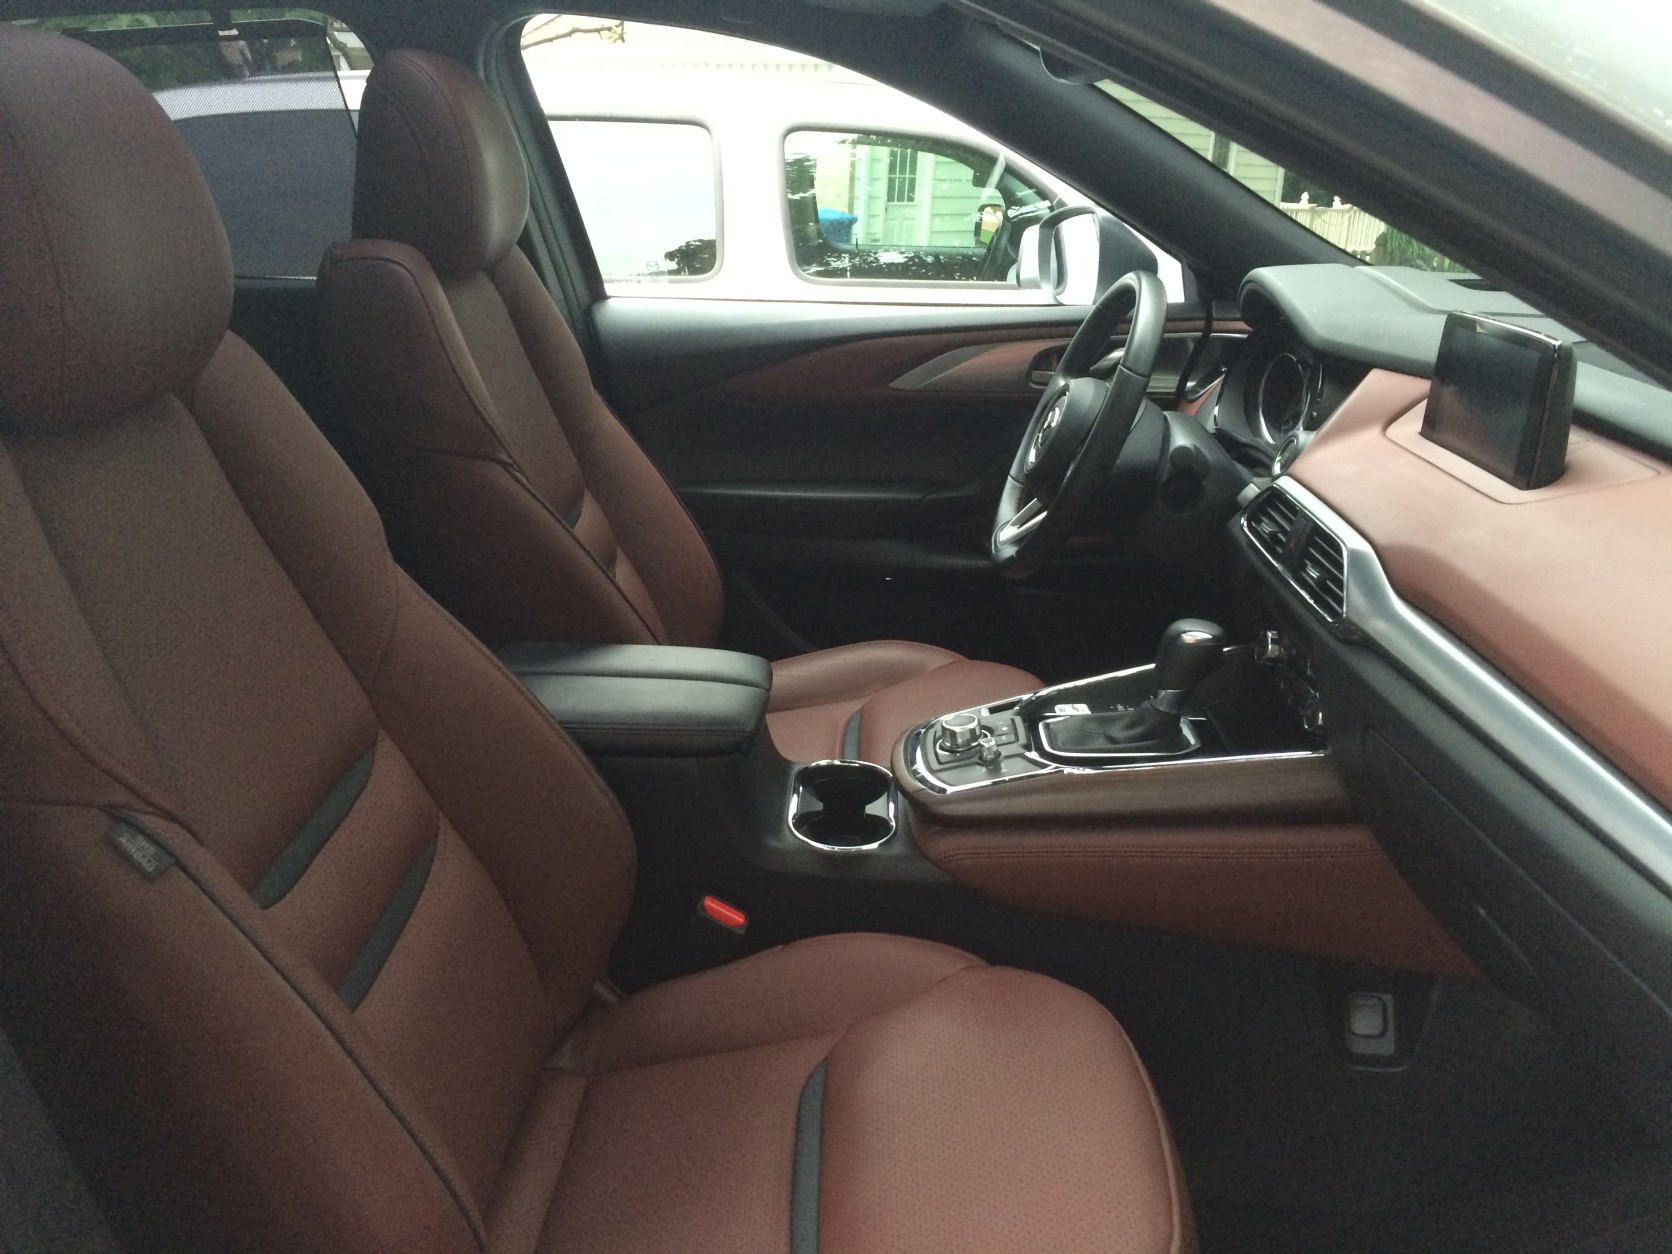 Luxury is the theme inside this new Mazda CX-9 Signature, with a nice upscale interior. (WTOP/Mike Parris)